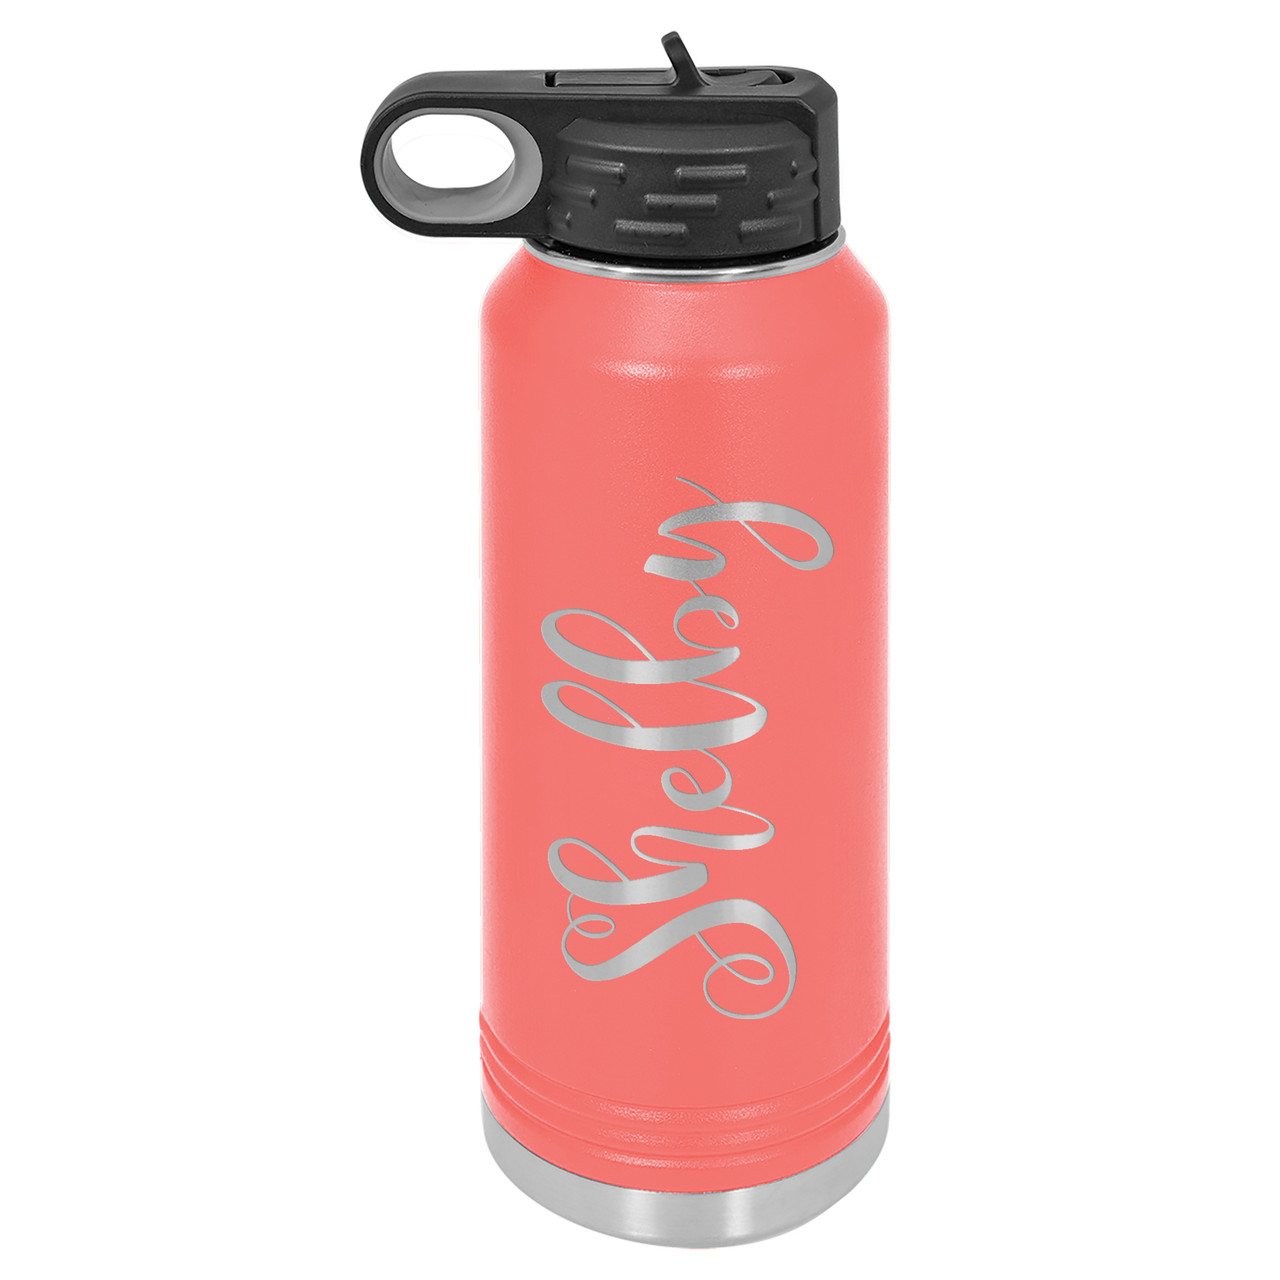 https://cdn11.bigcommerce.com/s-99vleihby8/images/stencil/1280x1280/products/1832/7425/Custom_name_Water_Bottle_-_matte_coral__03059.1610646266.jpg?c=2